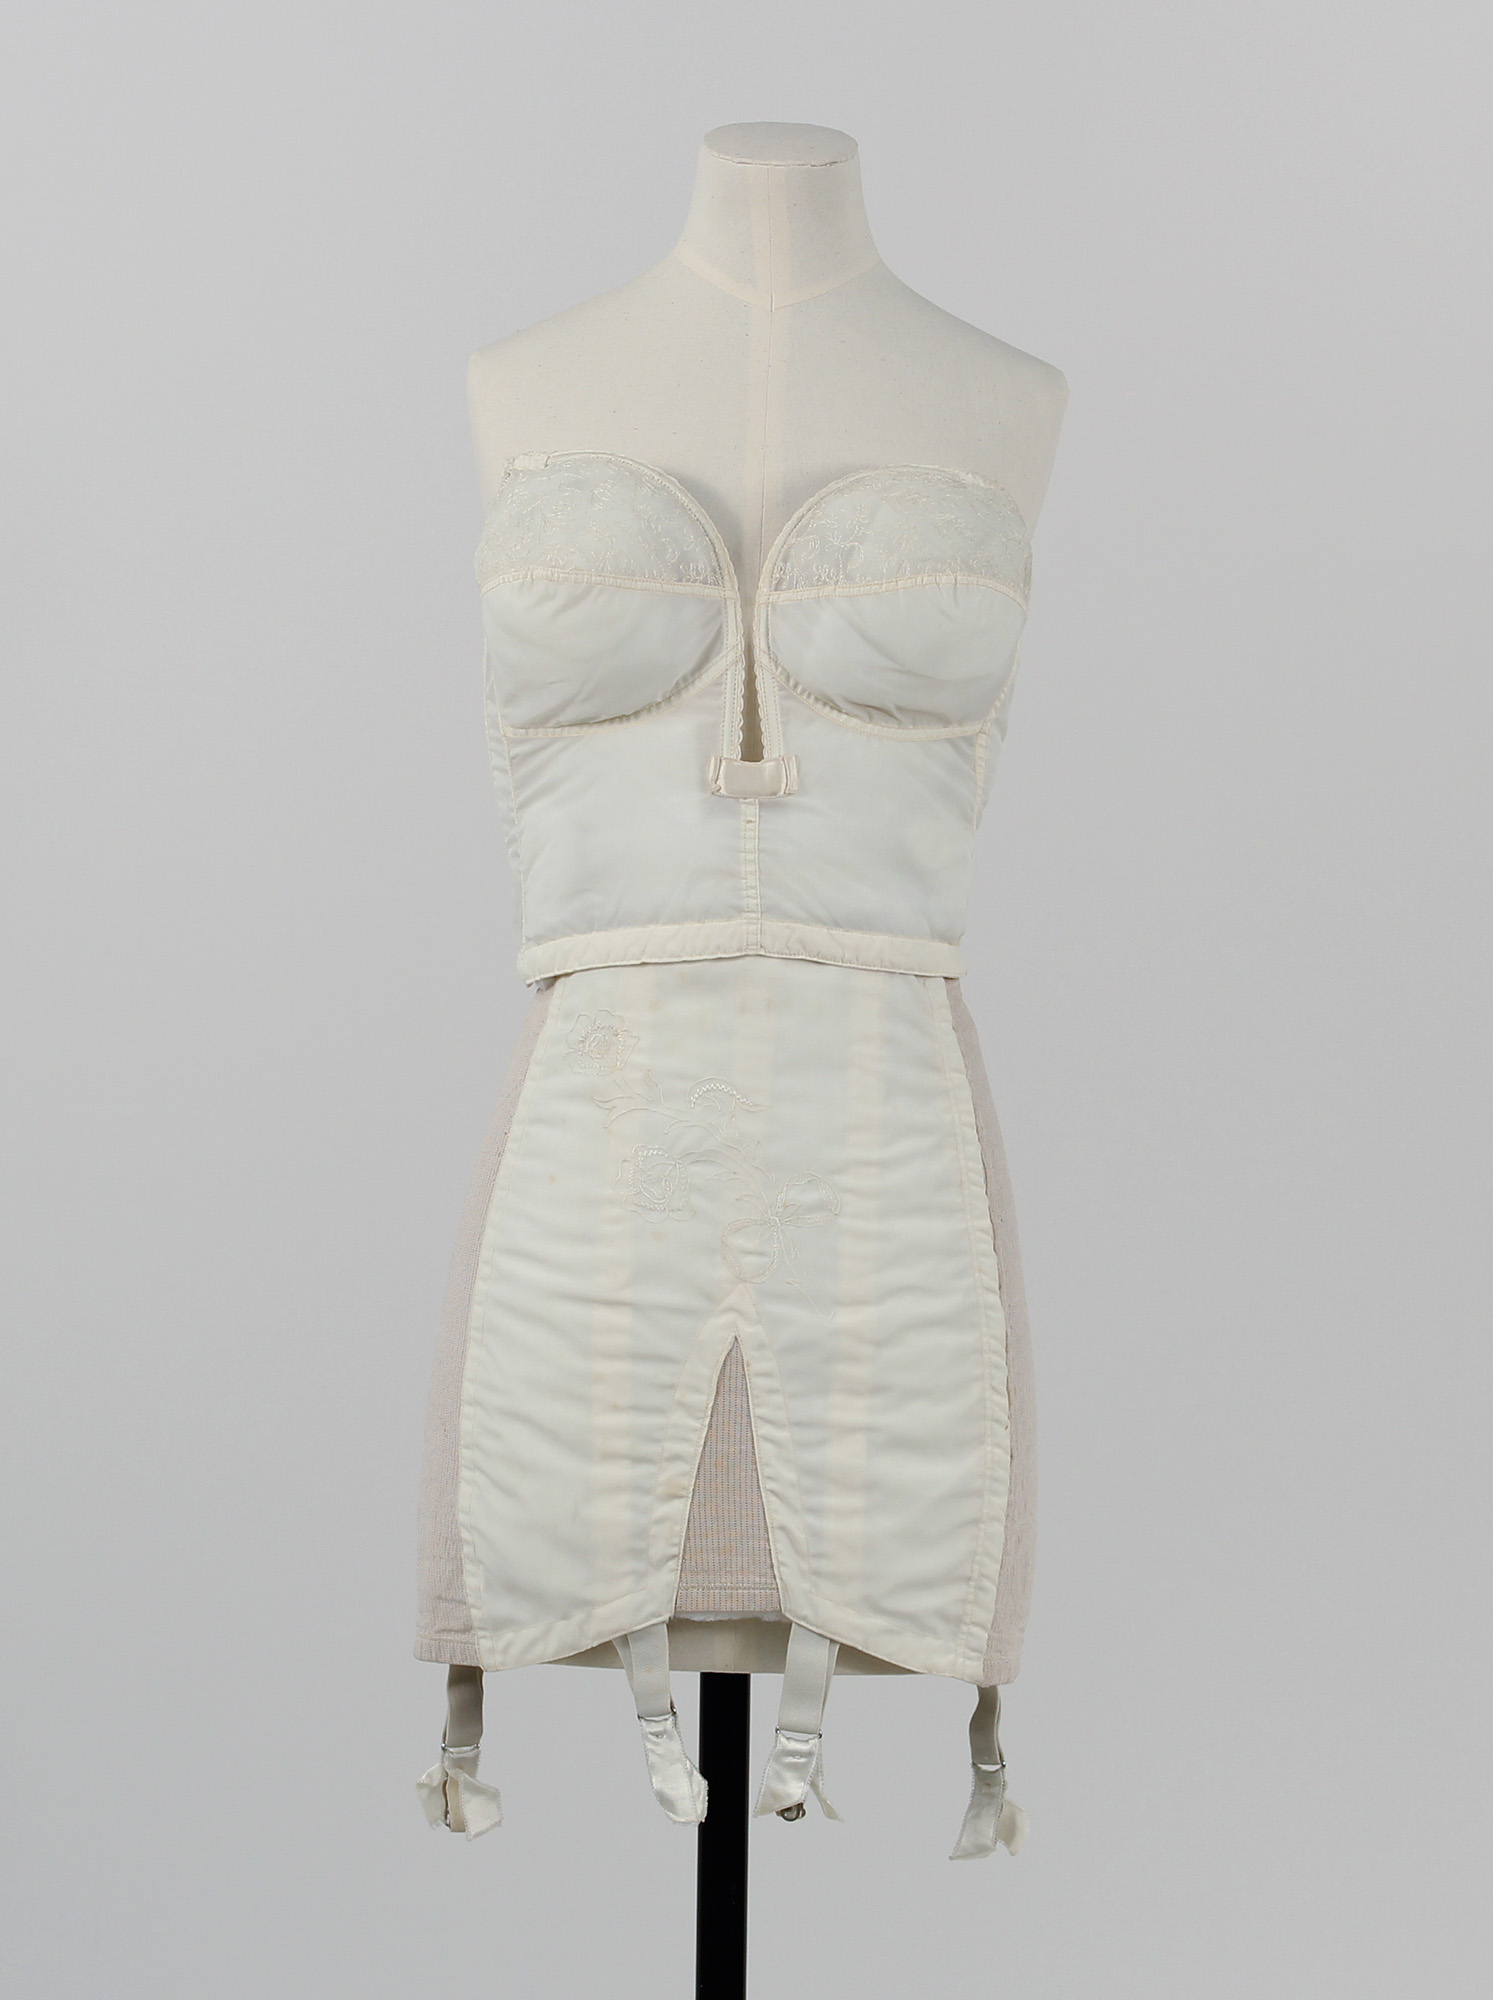 Women's 1950s underwear set consisting of a strapless, longline bra, girdle and suspenders